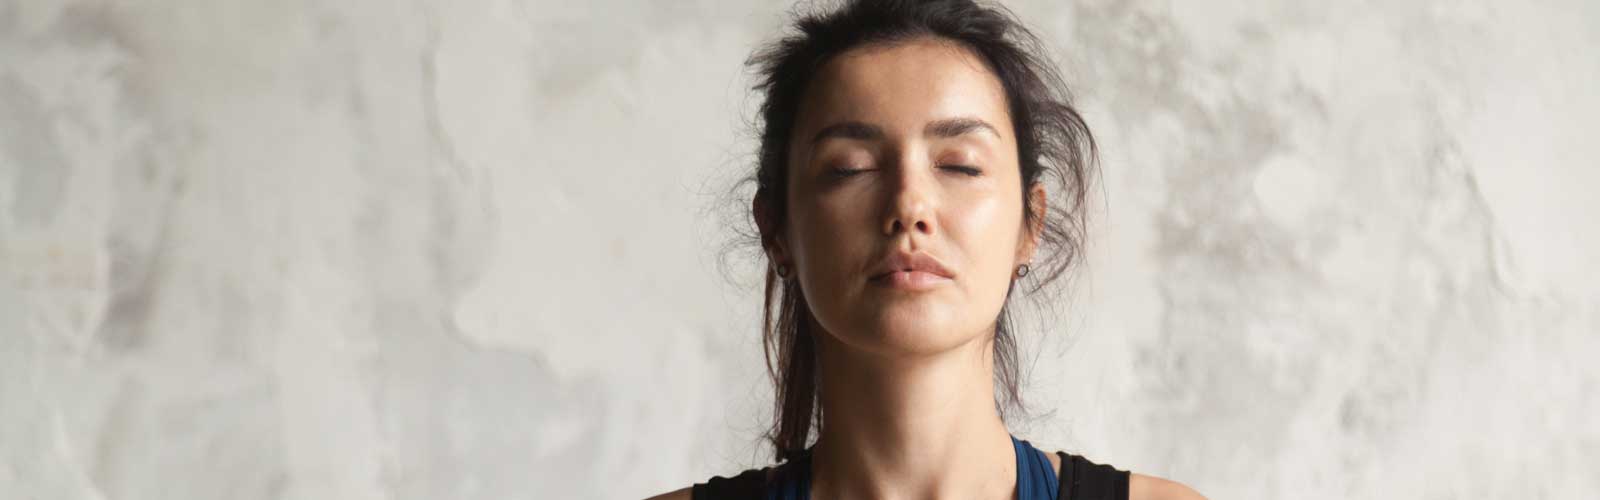 woman's face with closed eyes practicing yoga stock photo